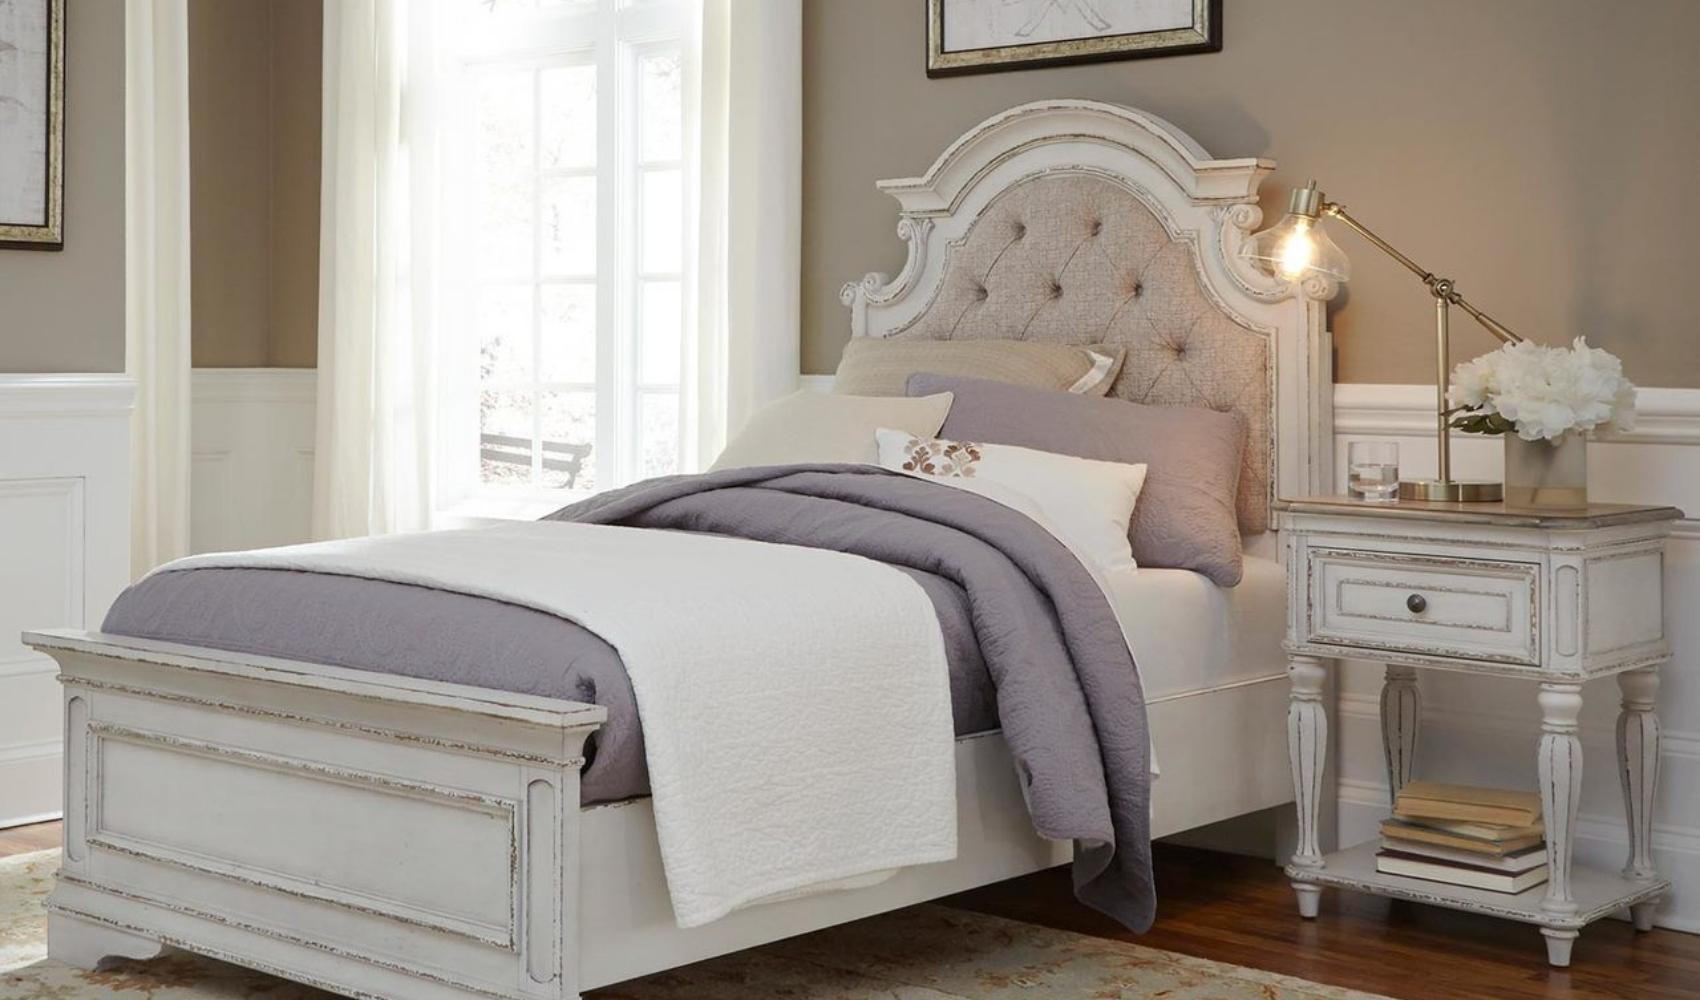 child's twin bed with upholstered headboard